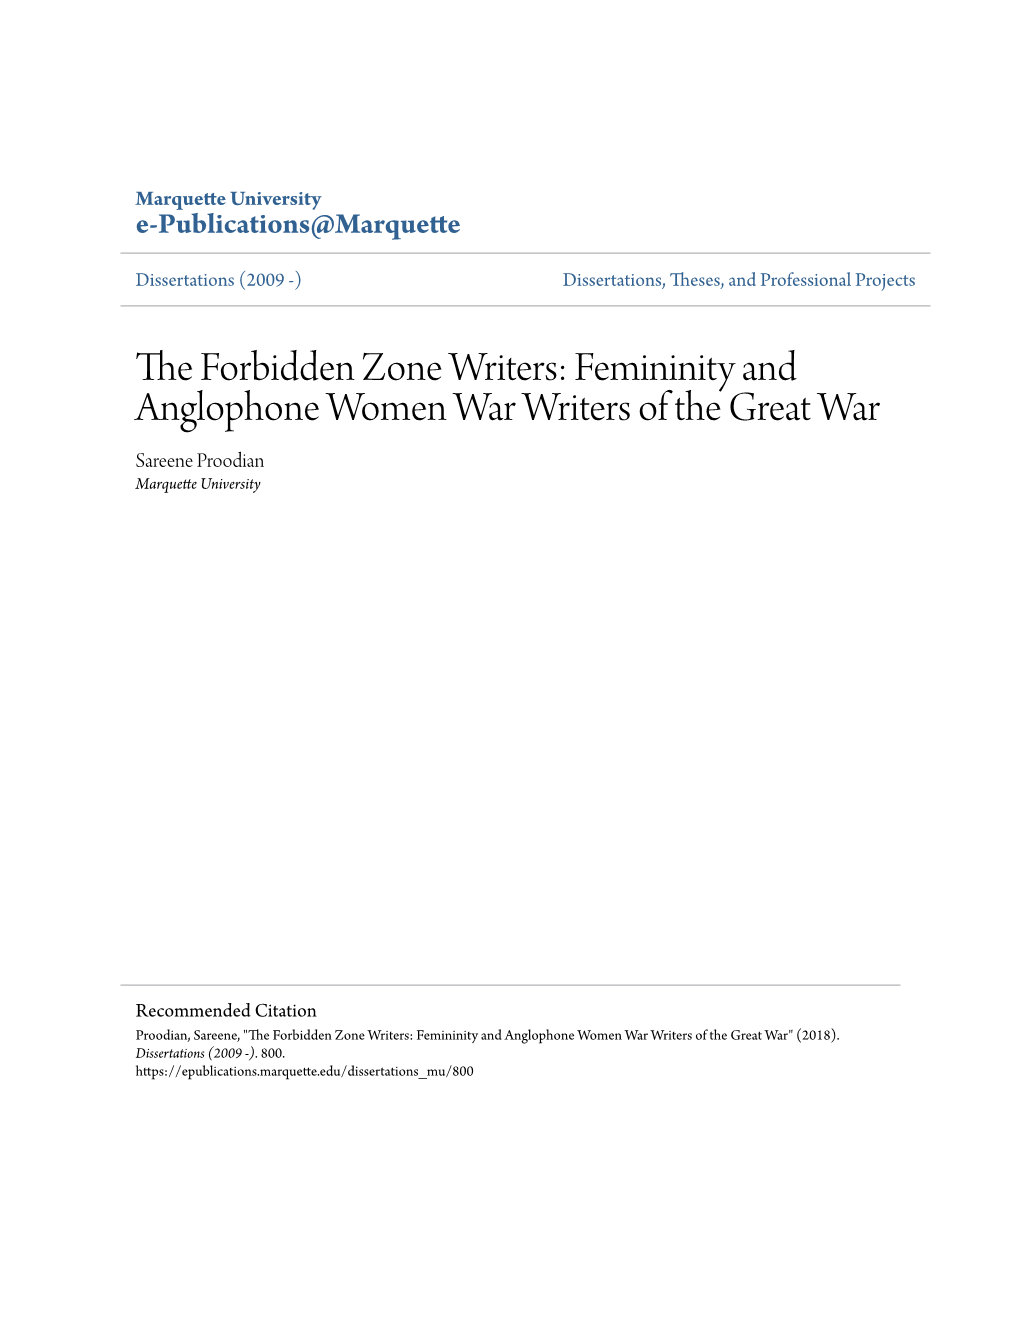 The Forbidden Zone Writers: Femininity and Anglophone Women War Writers of the Great